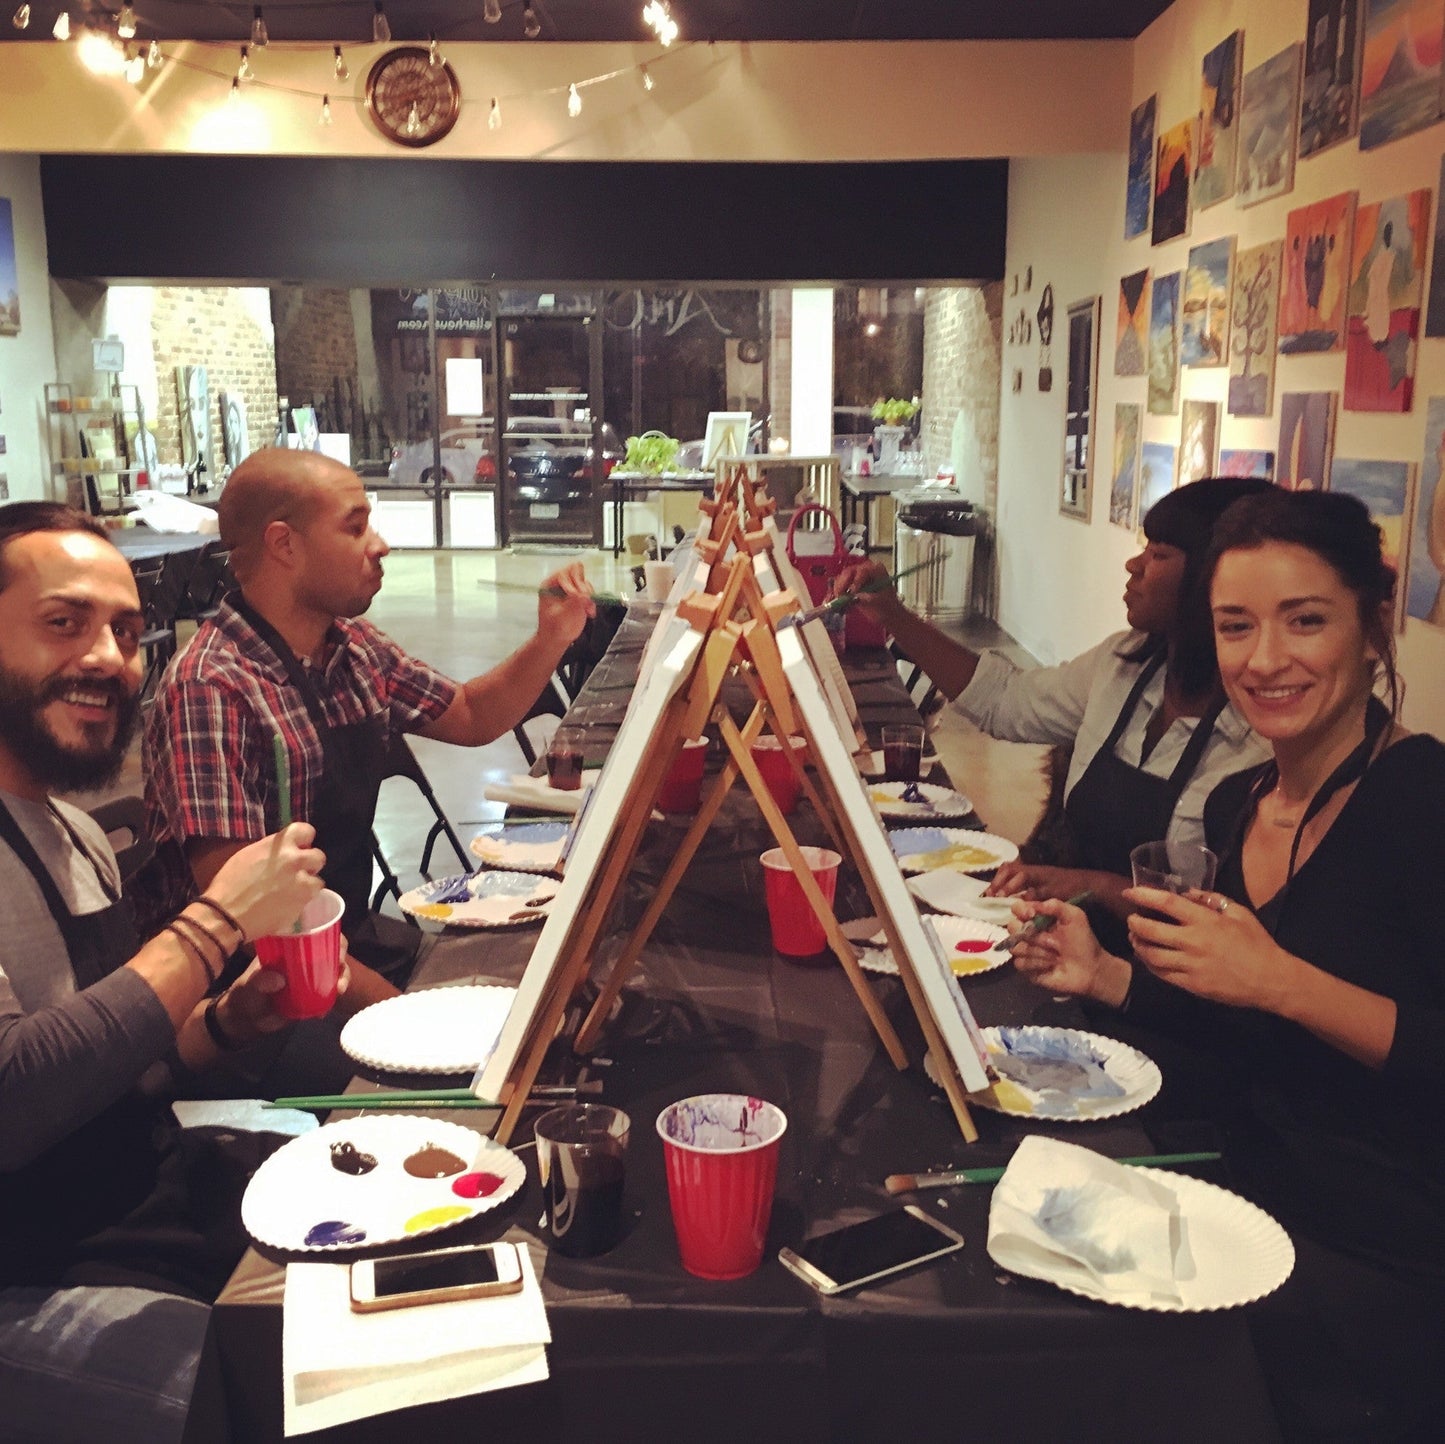 Wed, Feb 21st, 4-7P “The Sailboats” Private Corporate Painting Party